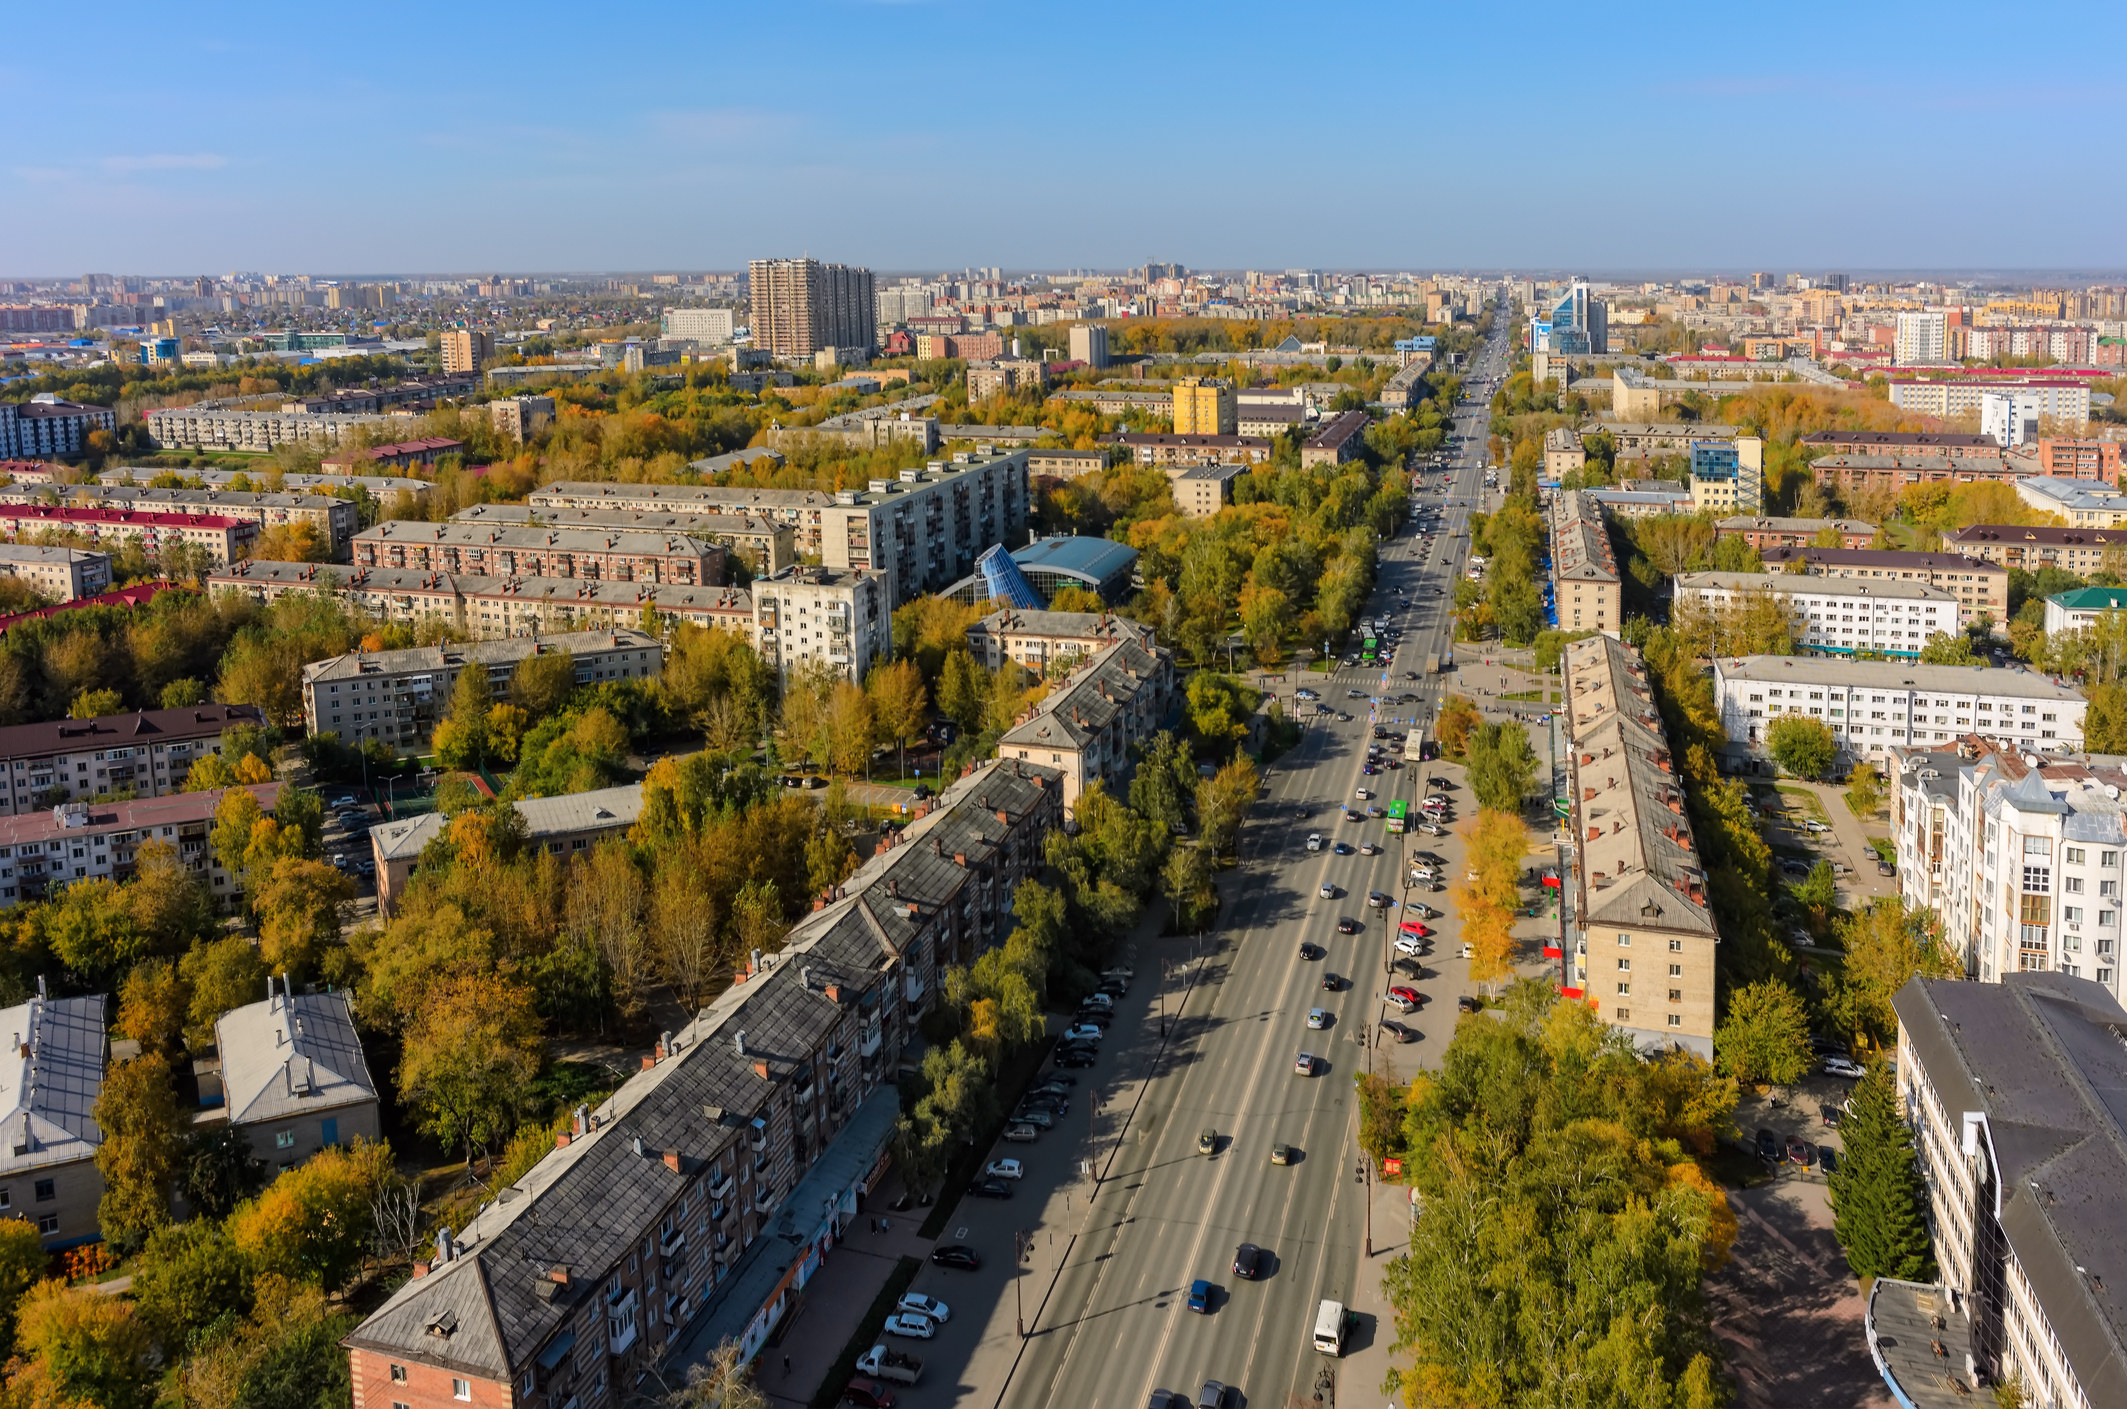 city view of tyumen, russia, with many homes and apartment buildings